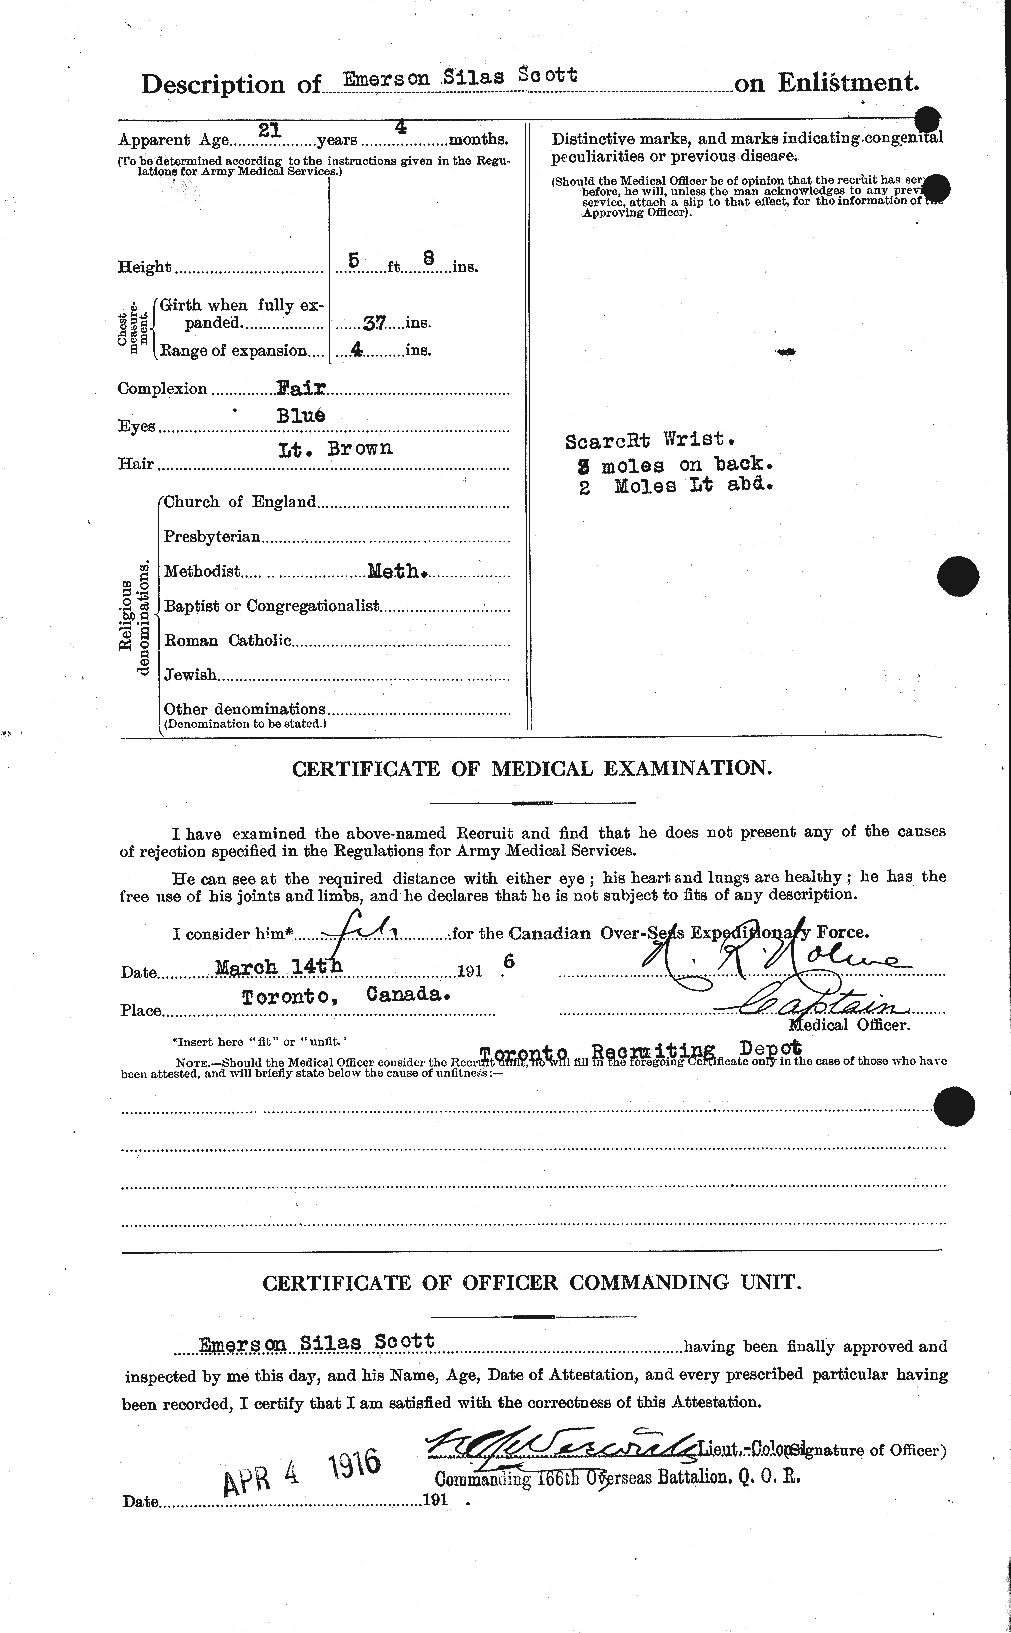 Personnel Records of the First World War - CEF 085029b